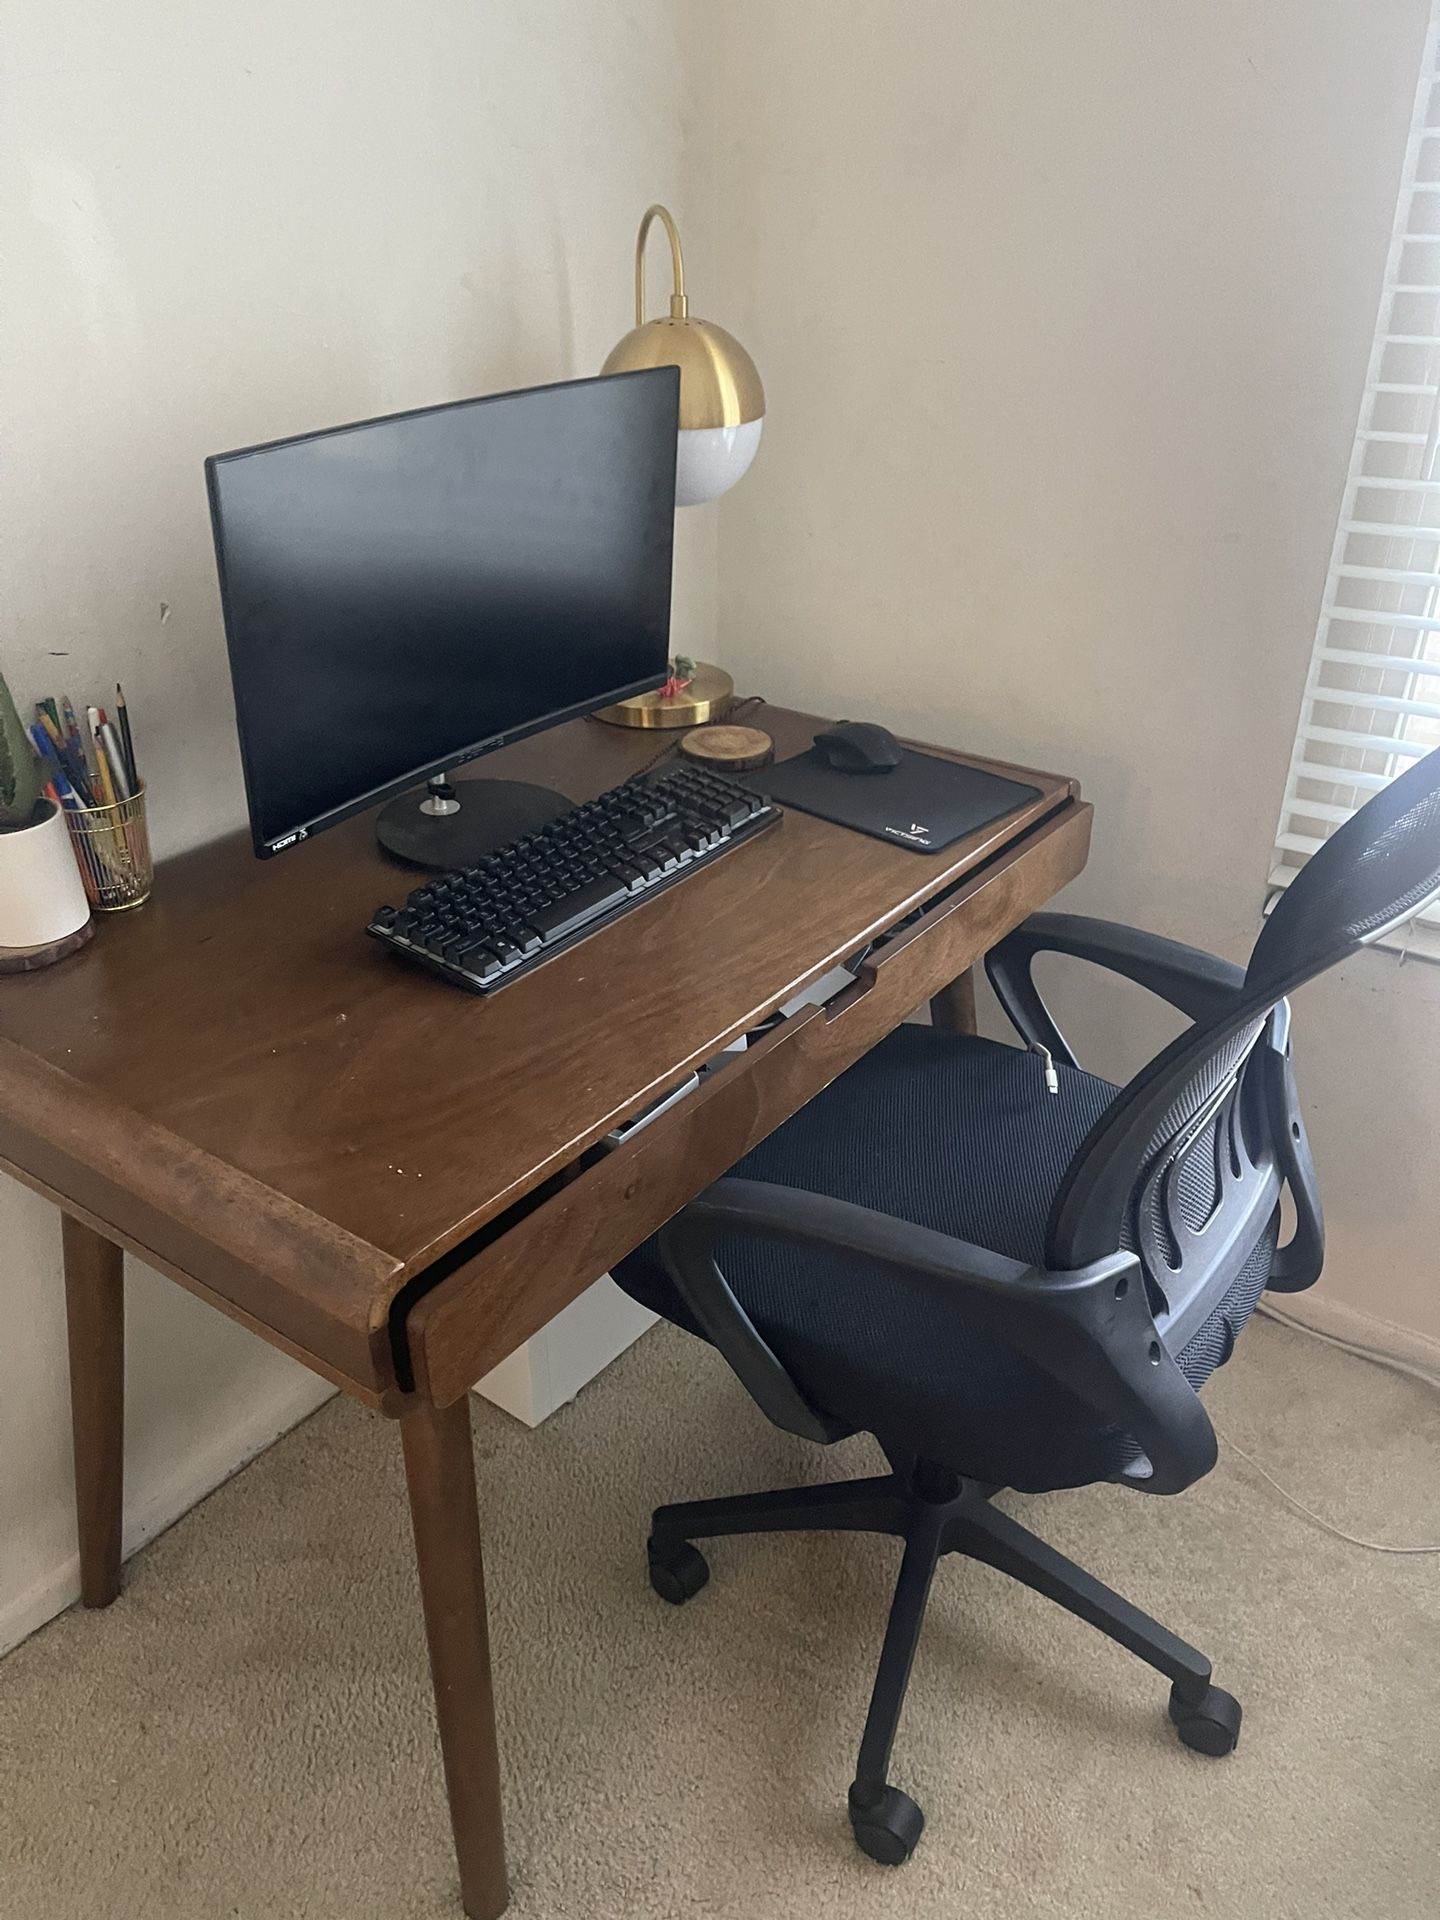 SALE WAYFAIR STUNNING COMPUTER DESK WITH LAMP $400 NOW FOR $250